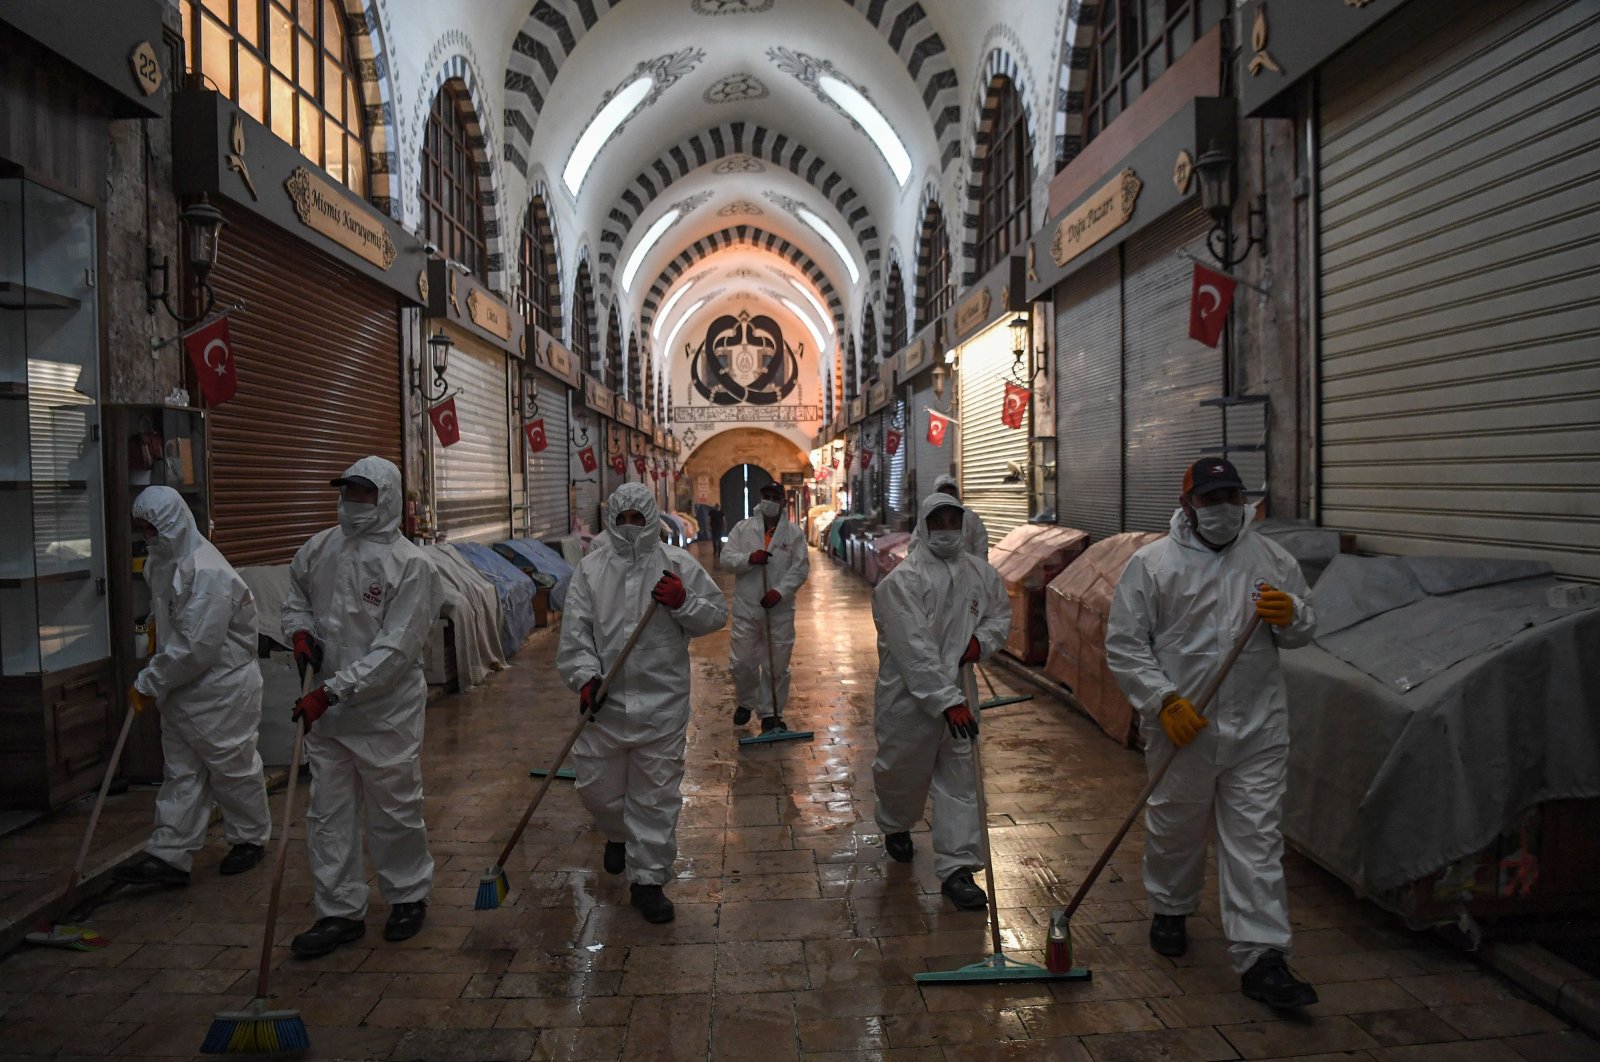 Fatih Municipality workers wearing personal protective equipment (PPE) disinfect the iconic Spice Bazaar to prevent the spread of the COVID-19, Istanbul, Turkey, May 28, 2020. (AFP Photo)